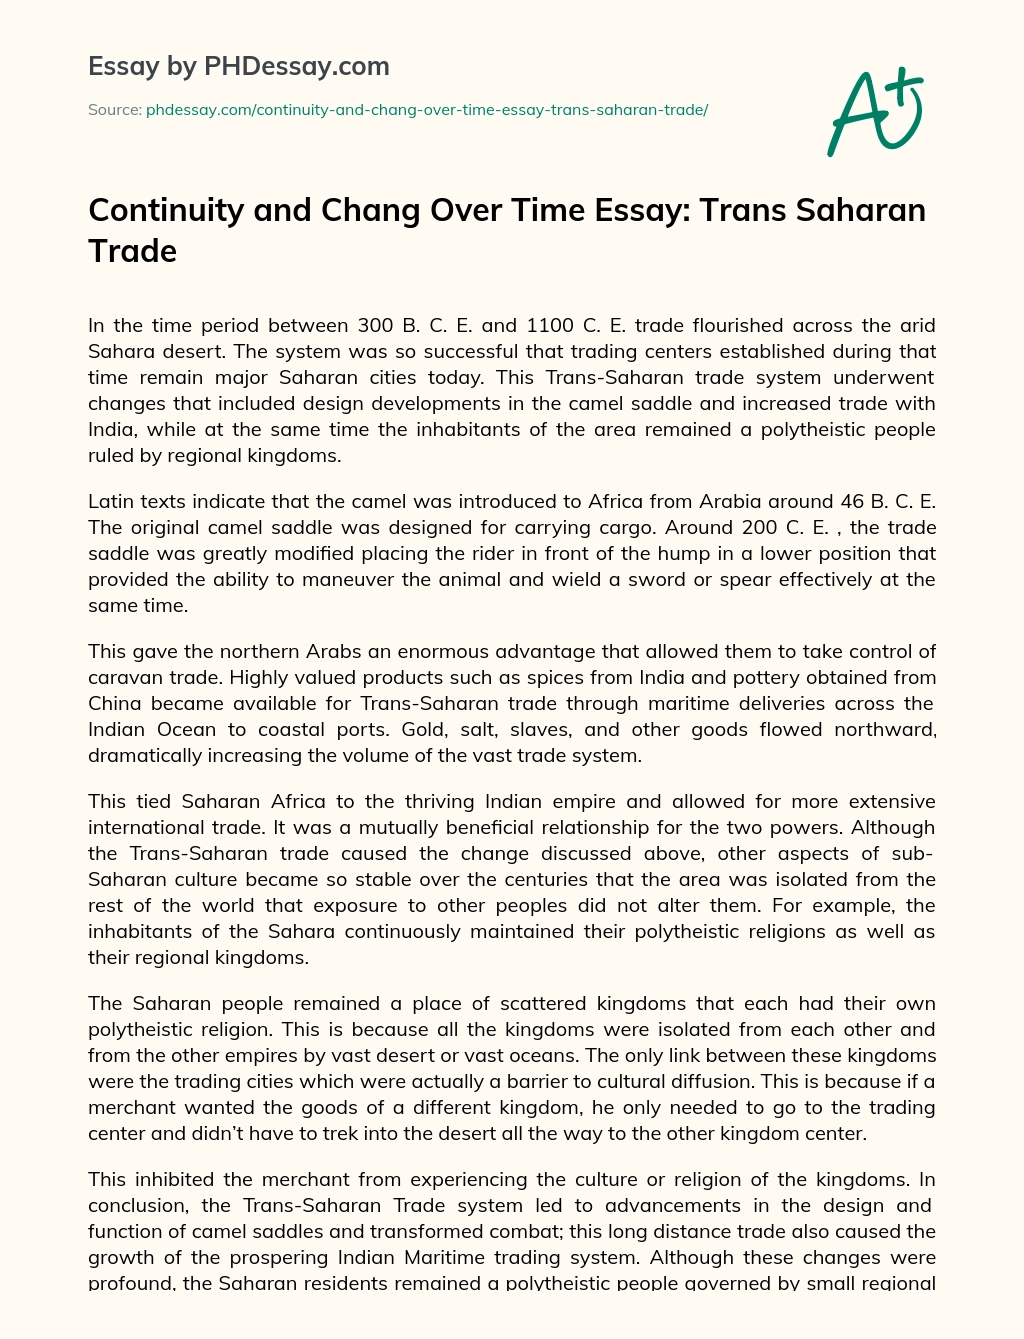 Continuity and Chang Over Time Essay: Trans Saharan Trade essay